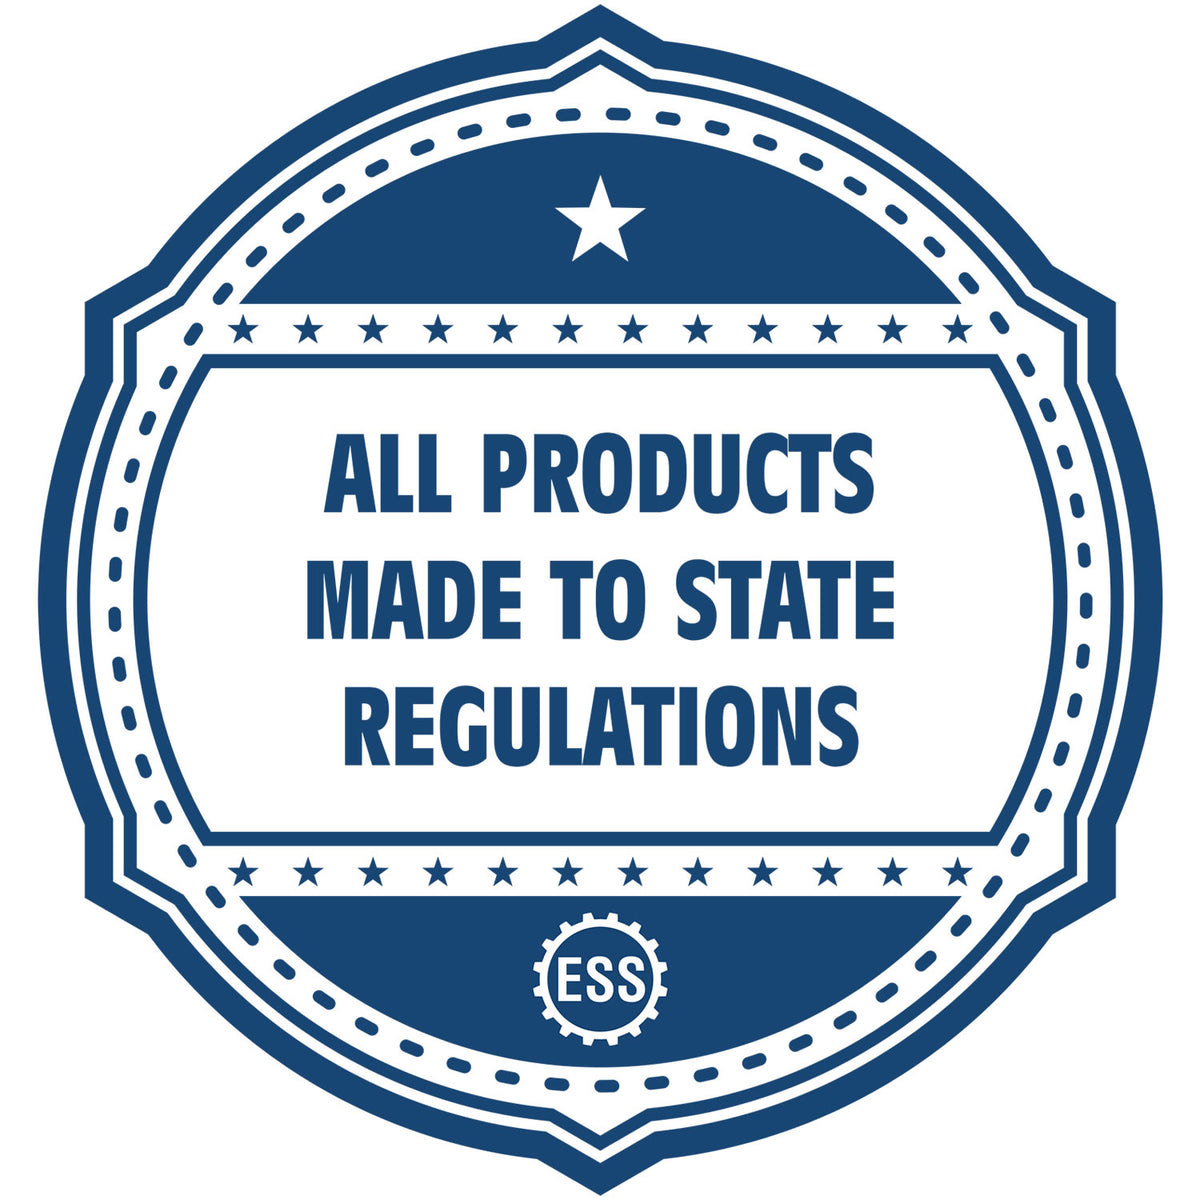 An icon or badge element for the Super Slim Minnesota Notary Public Stamp showing that this product is made in compliance with state regulations.